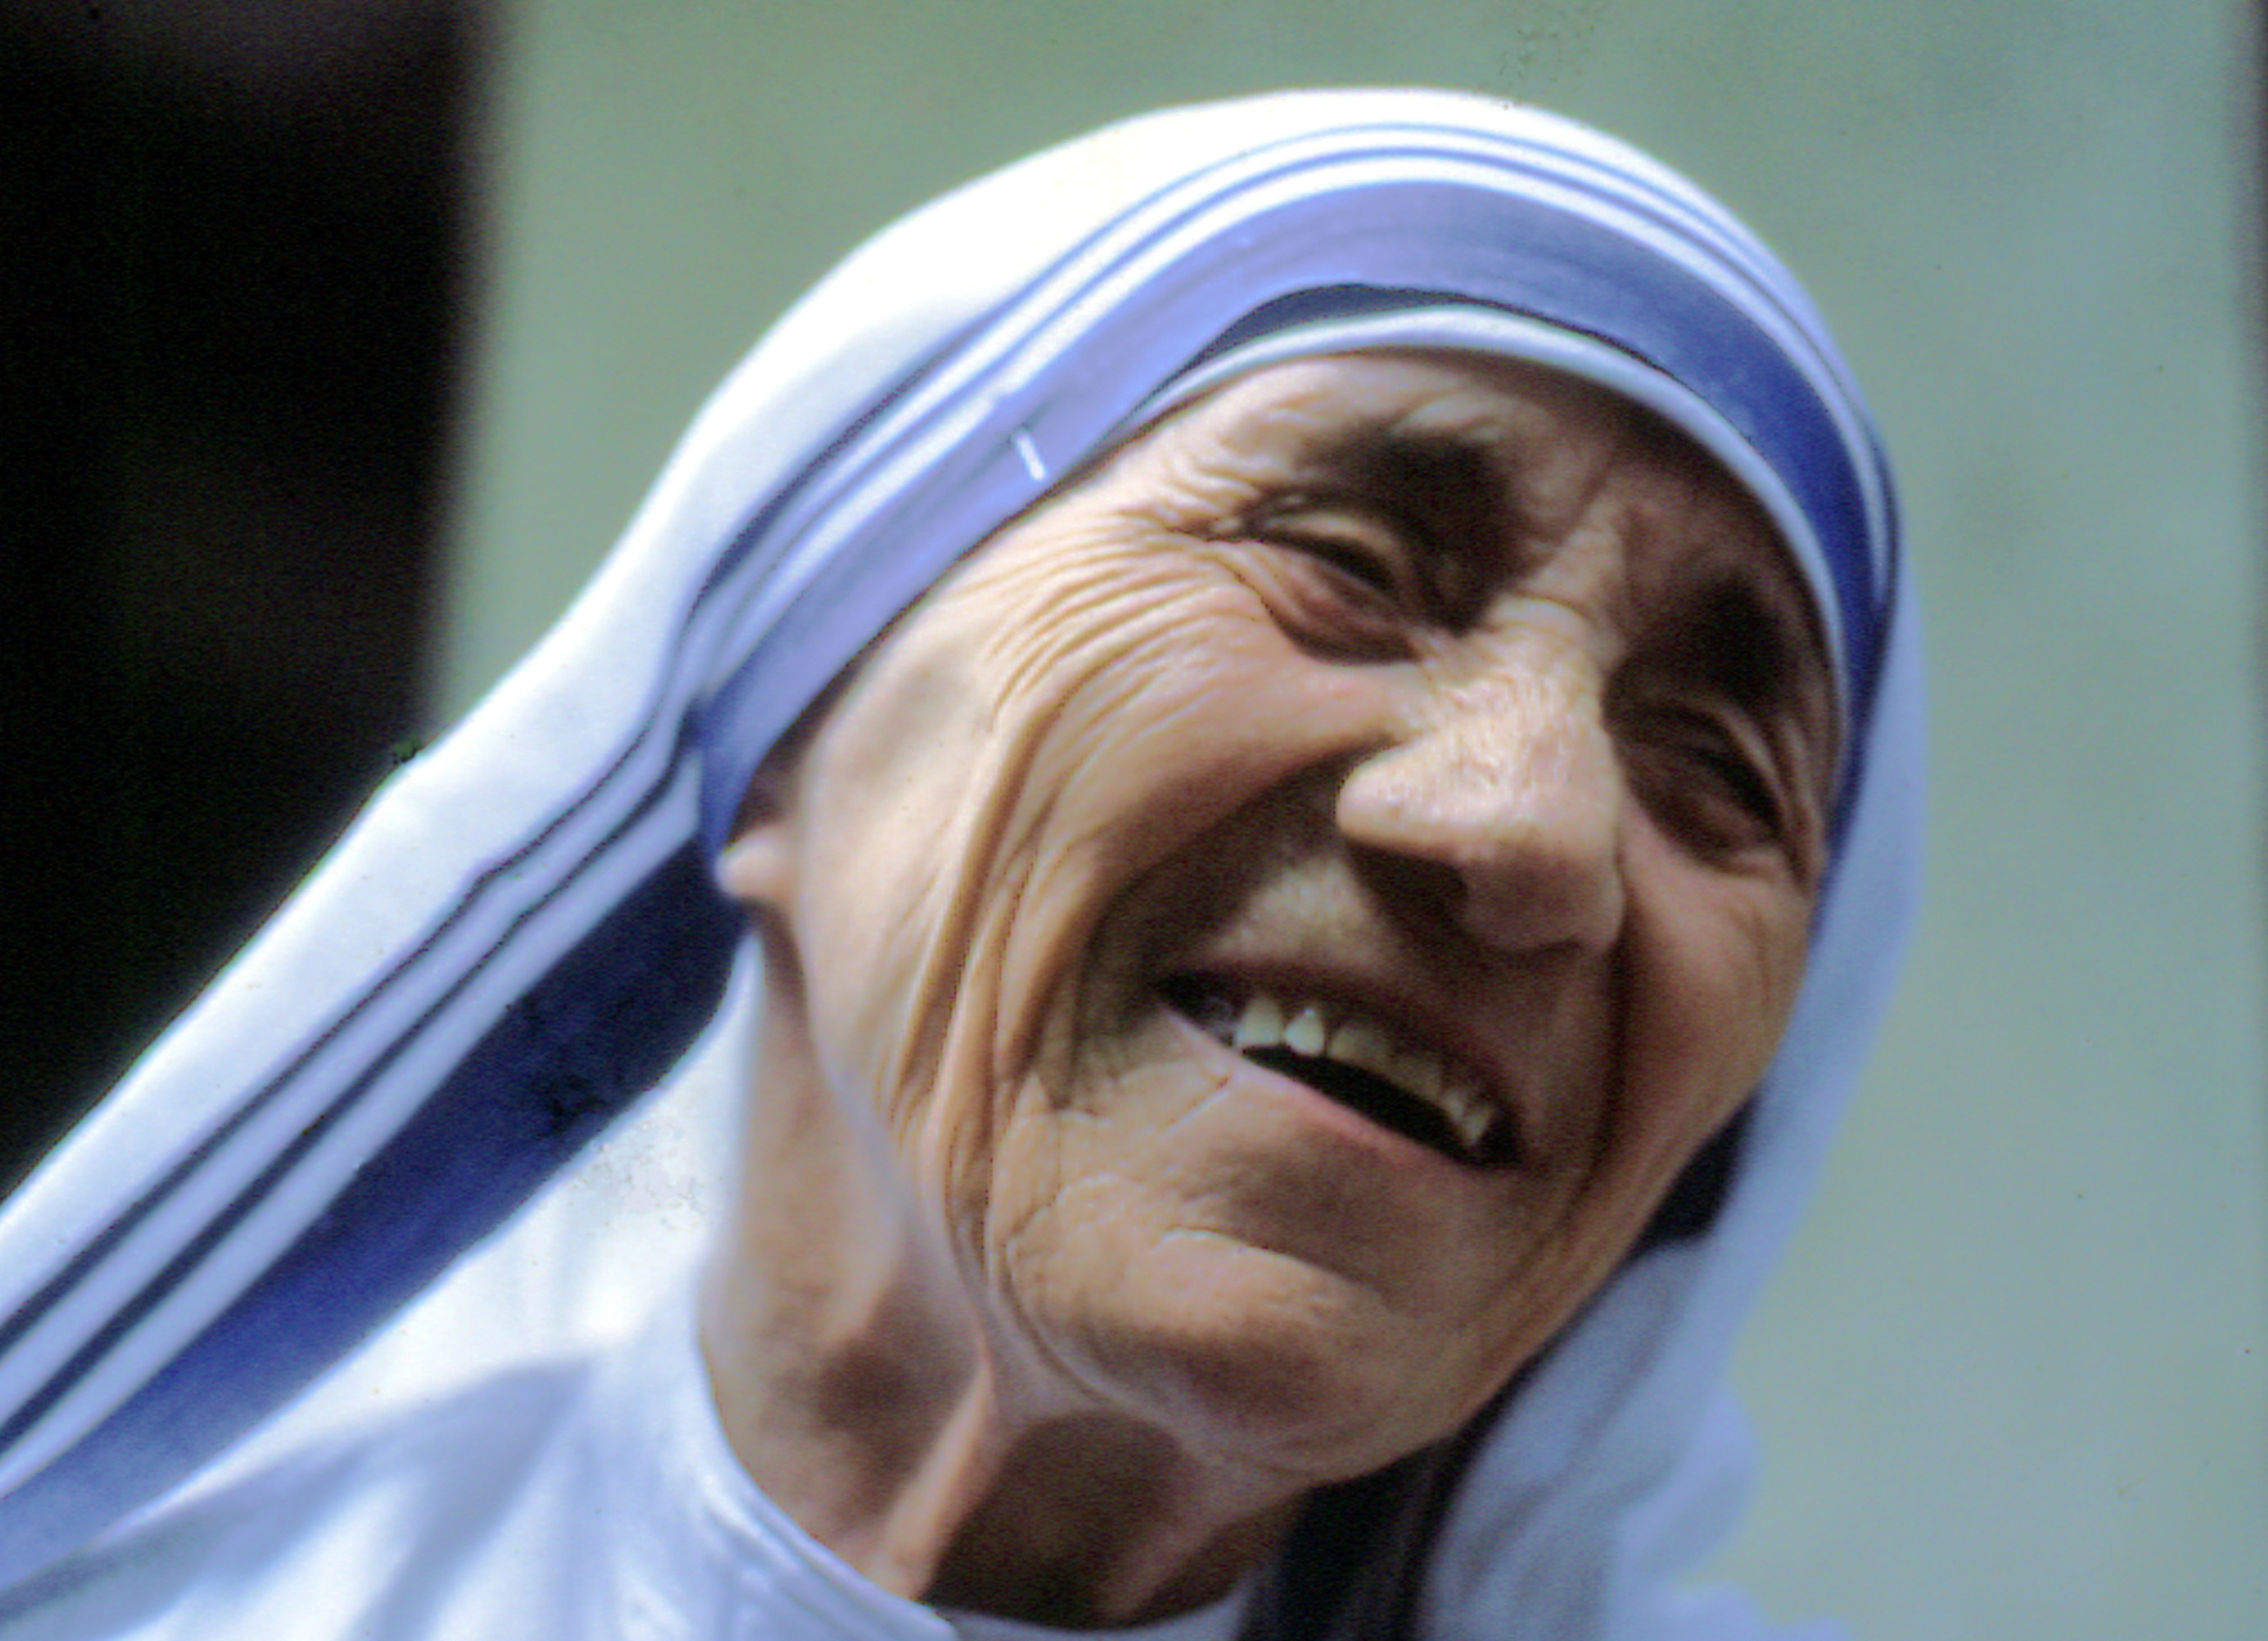 Blessed Mother Teresa of Calcutta (1910 – 1997)